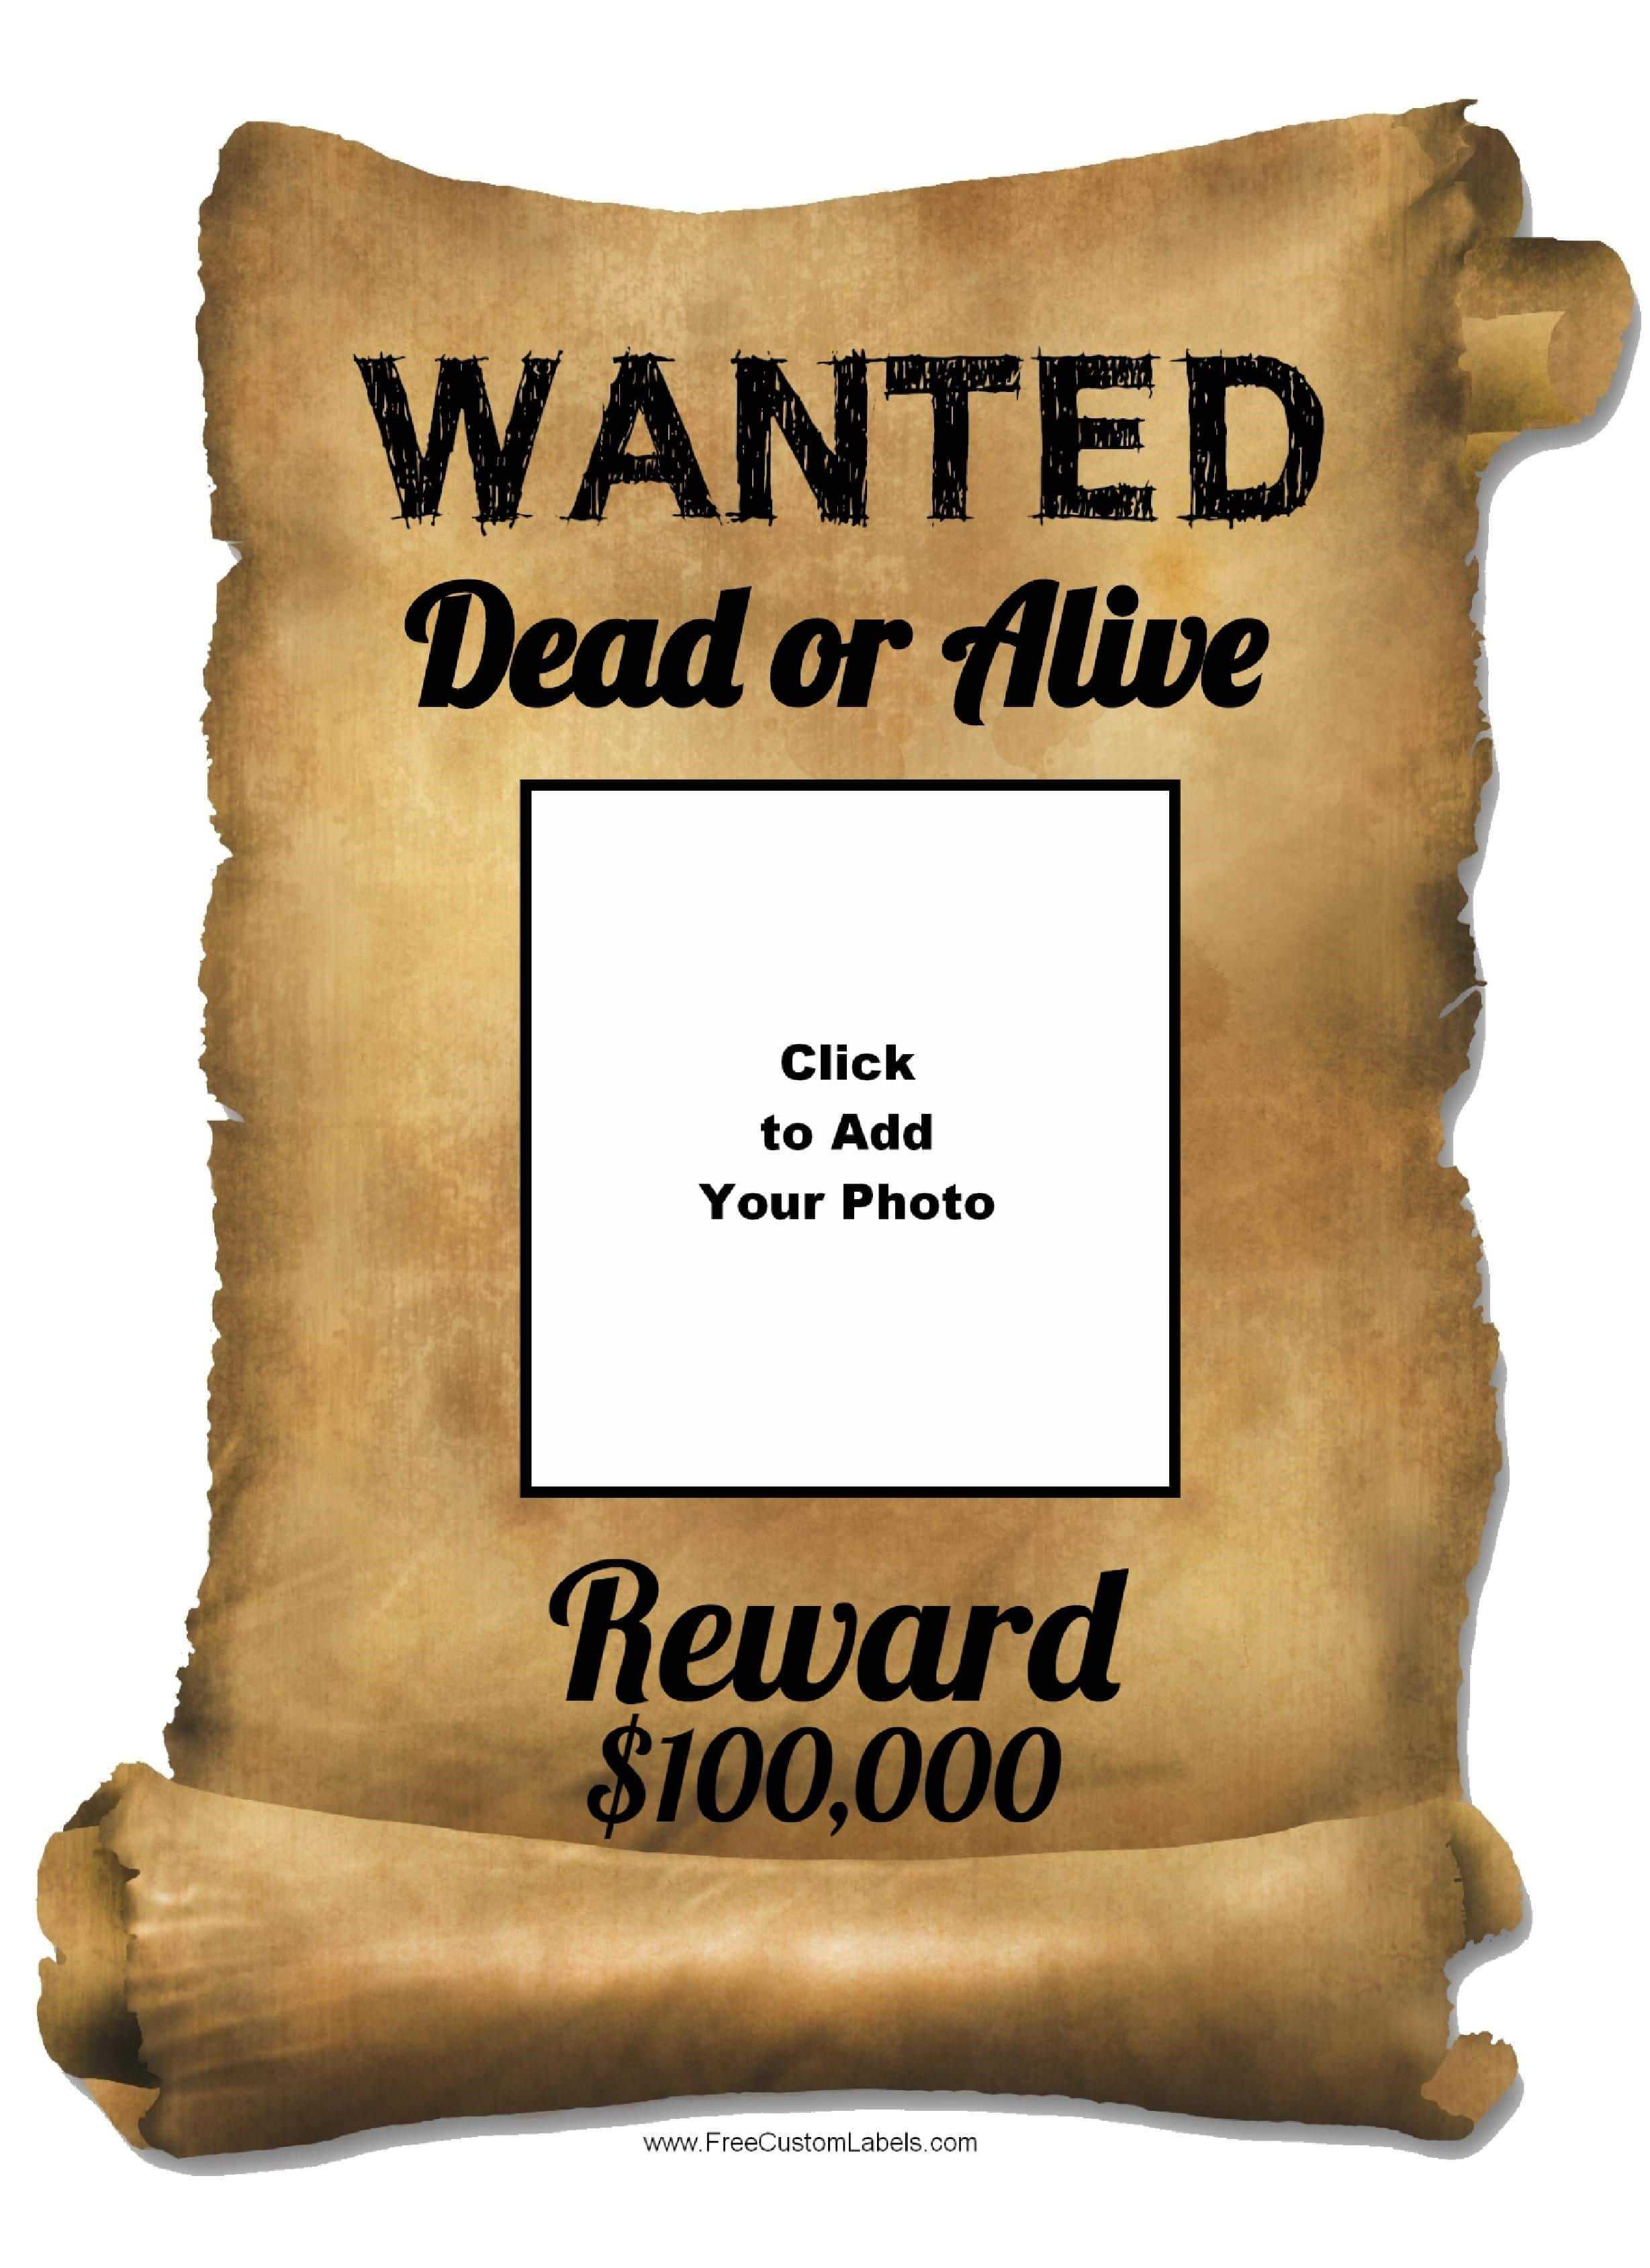 Free Wanted Poster Maker Make a Free Printable Wanted Poster Online